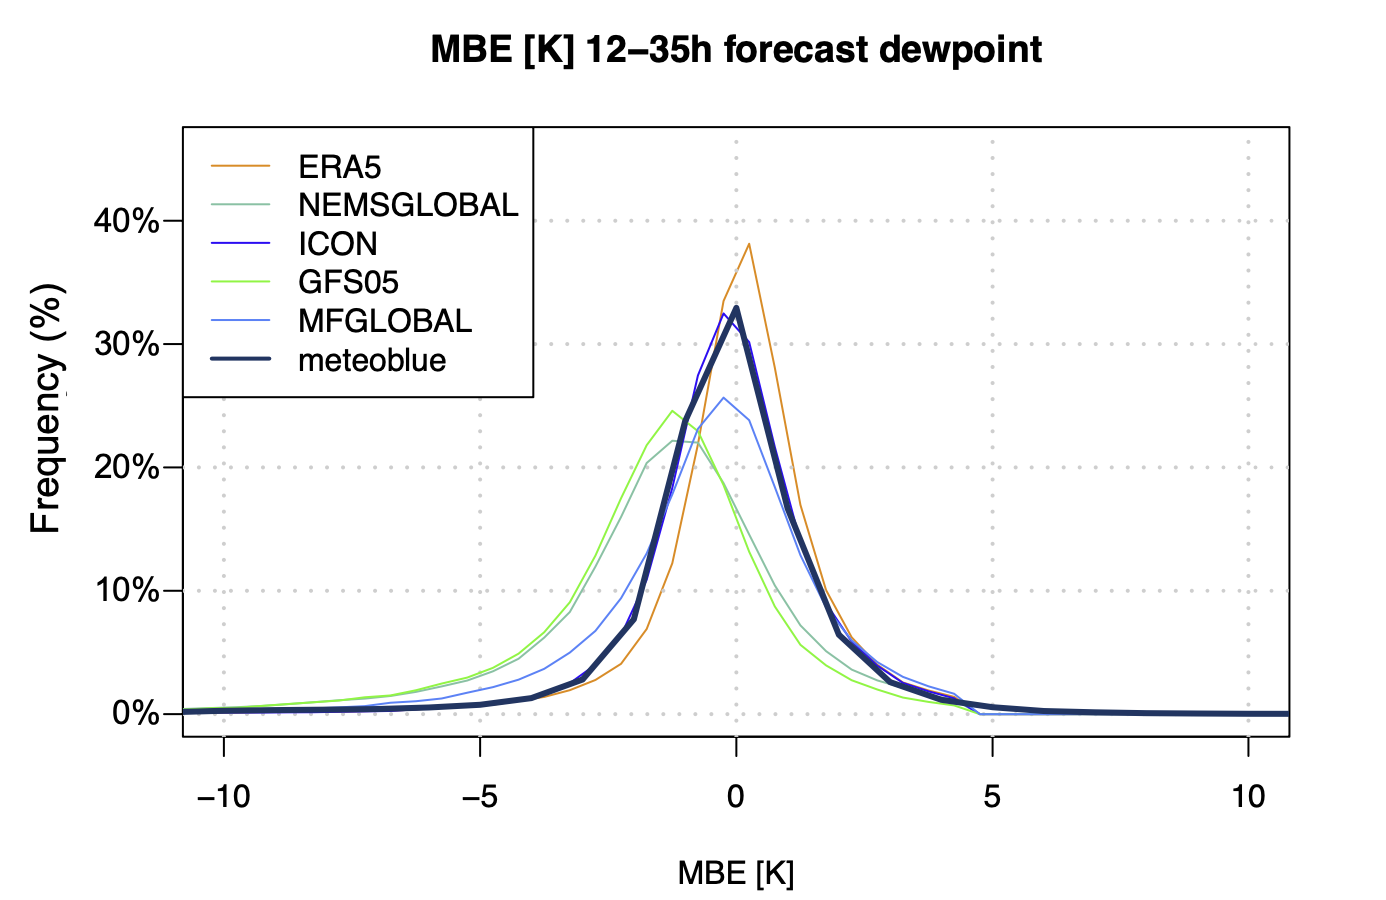 MBE of the meteoblue forecast, several weather forecast models and the ERA5 reanalysis model by validating model results with 475 METAR stations for the year 2021.